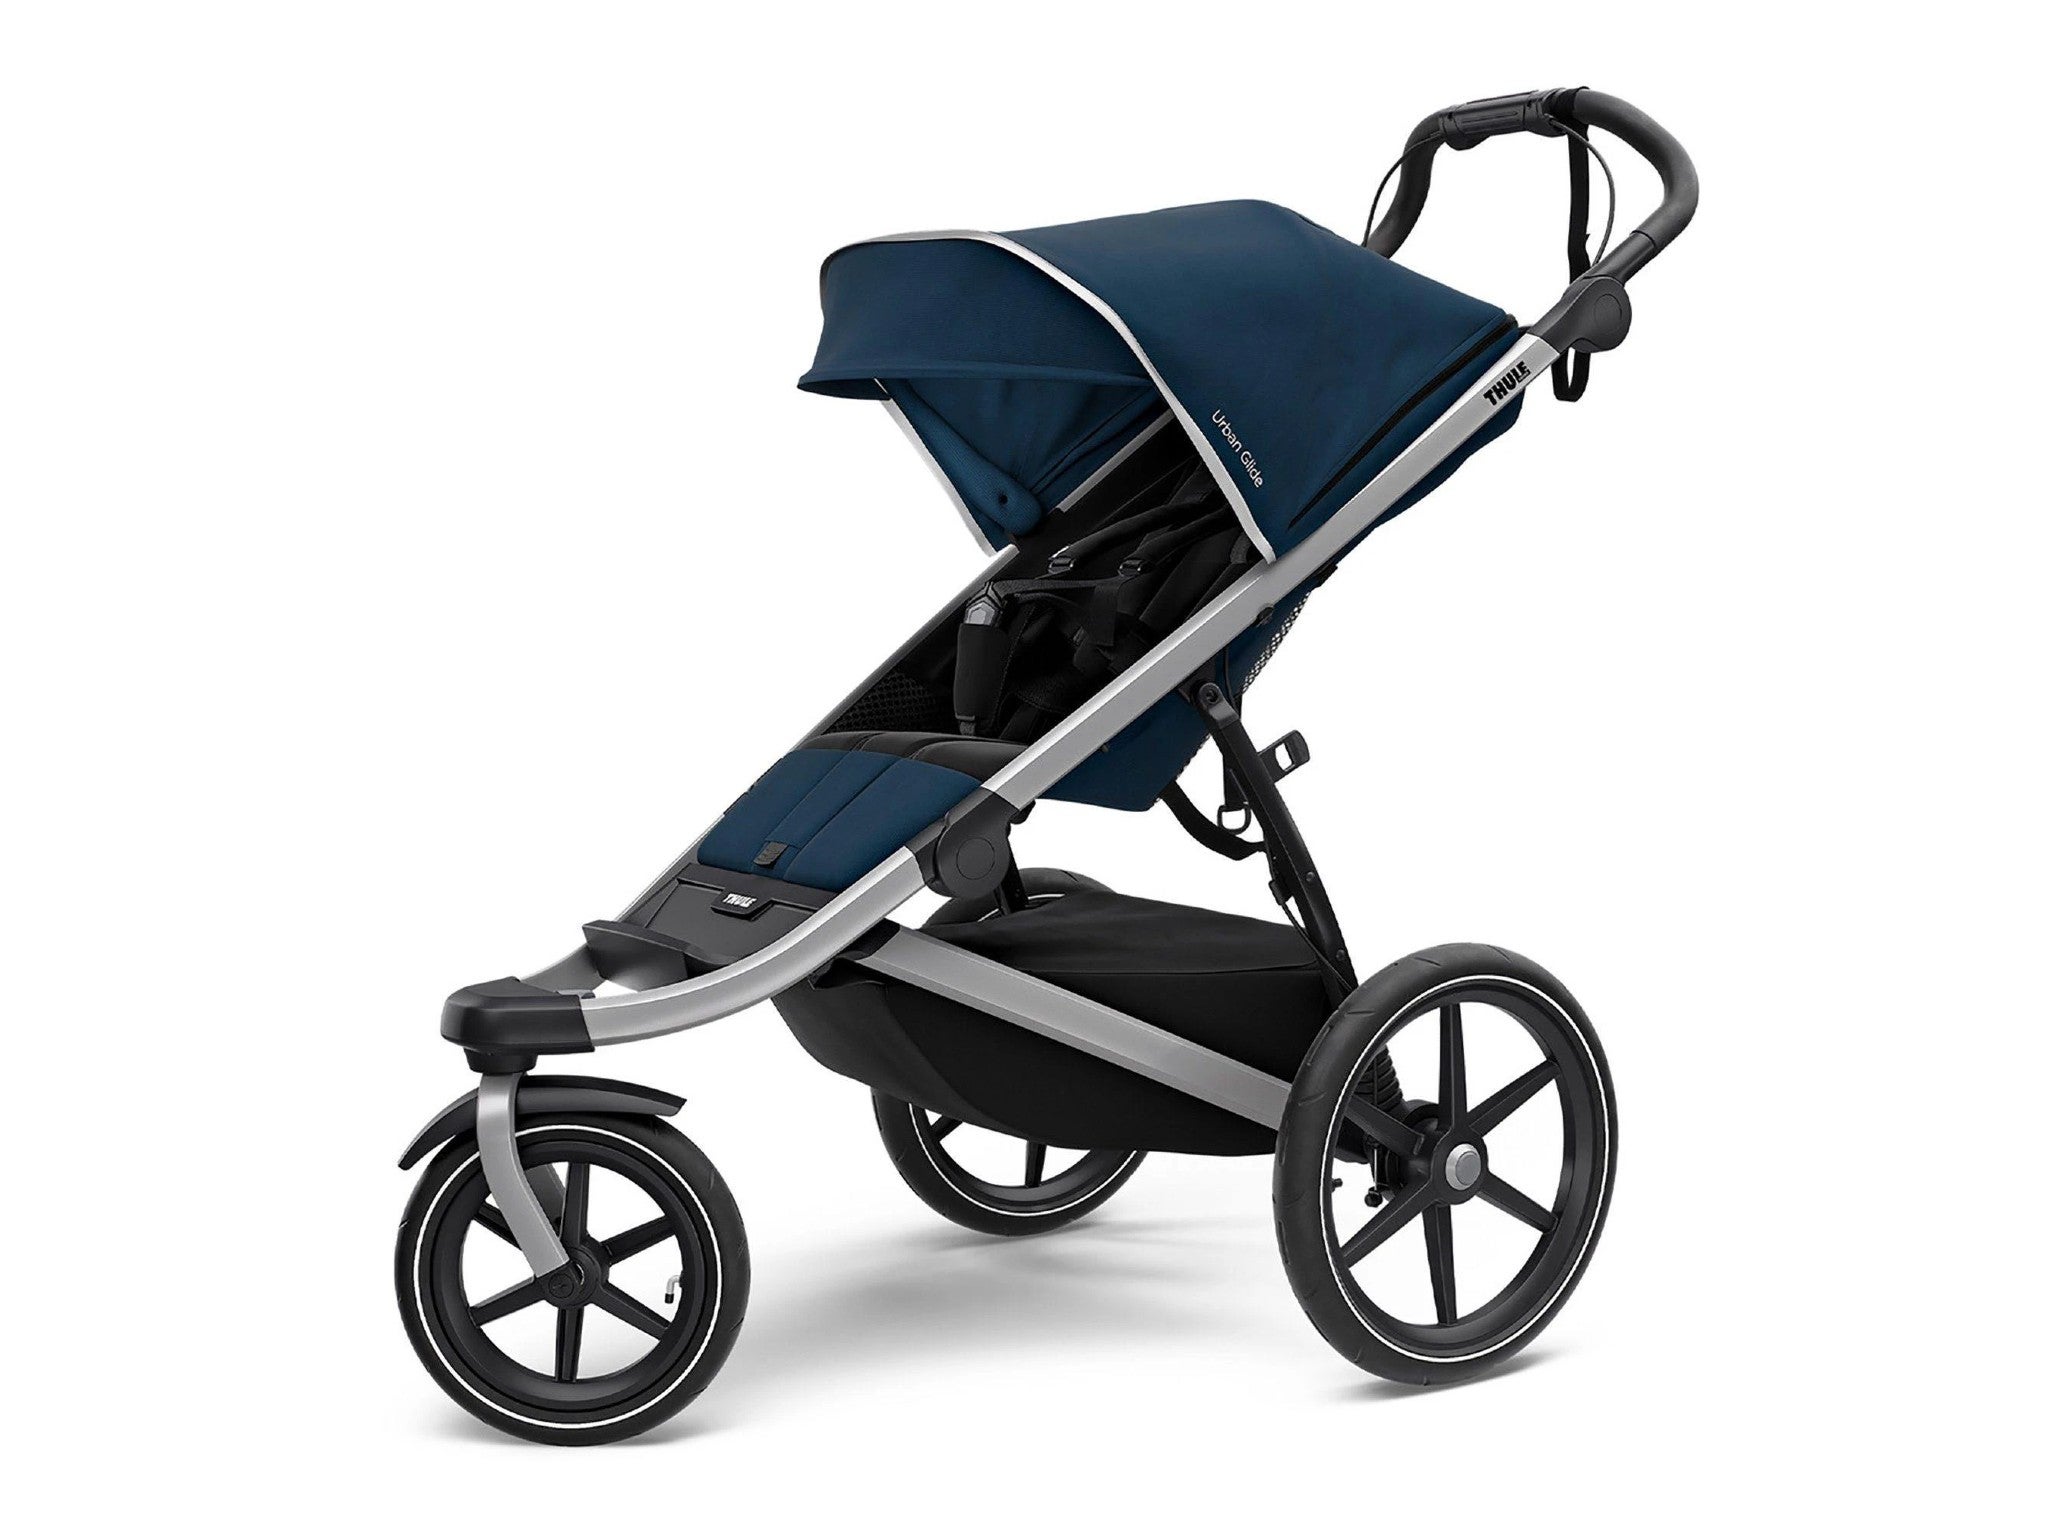 Thule urban glide 2 running buggy indybest